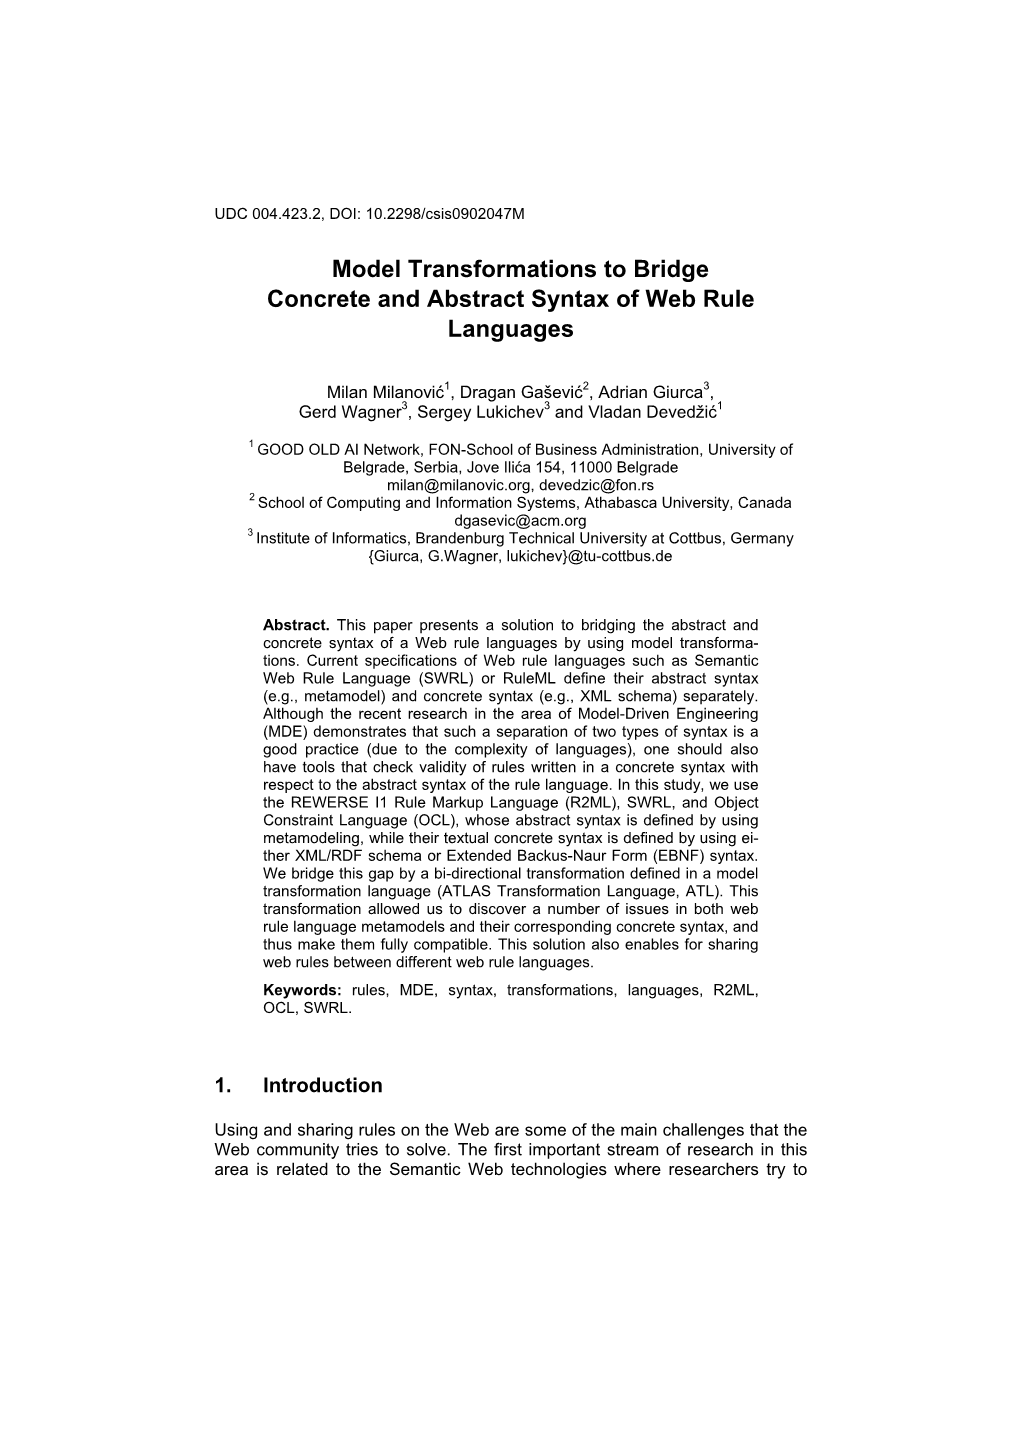 Model Transformations to Bridge Concrete and Abstract Syntax of Web Rule Languages